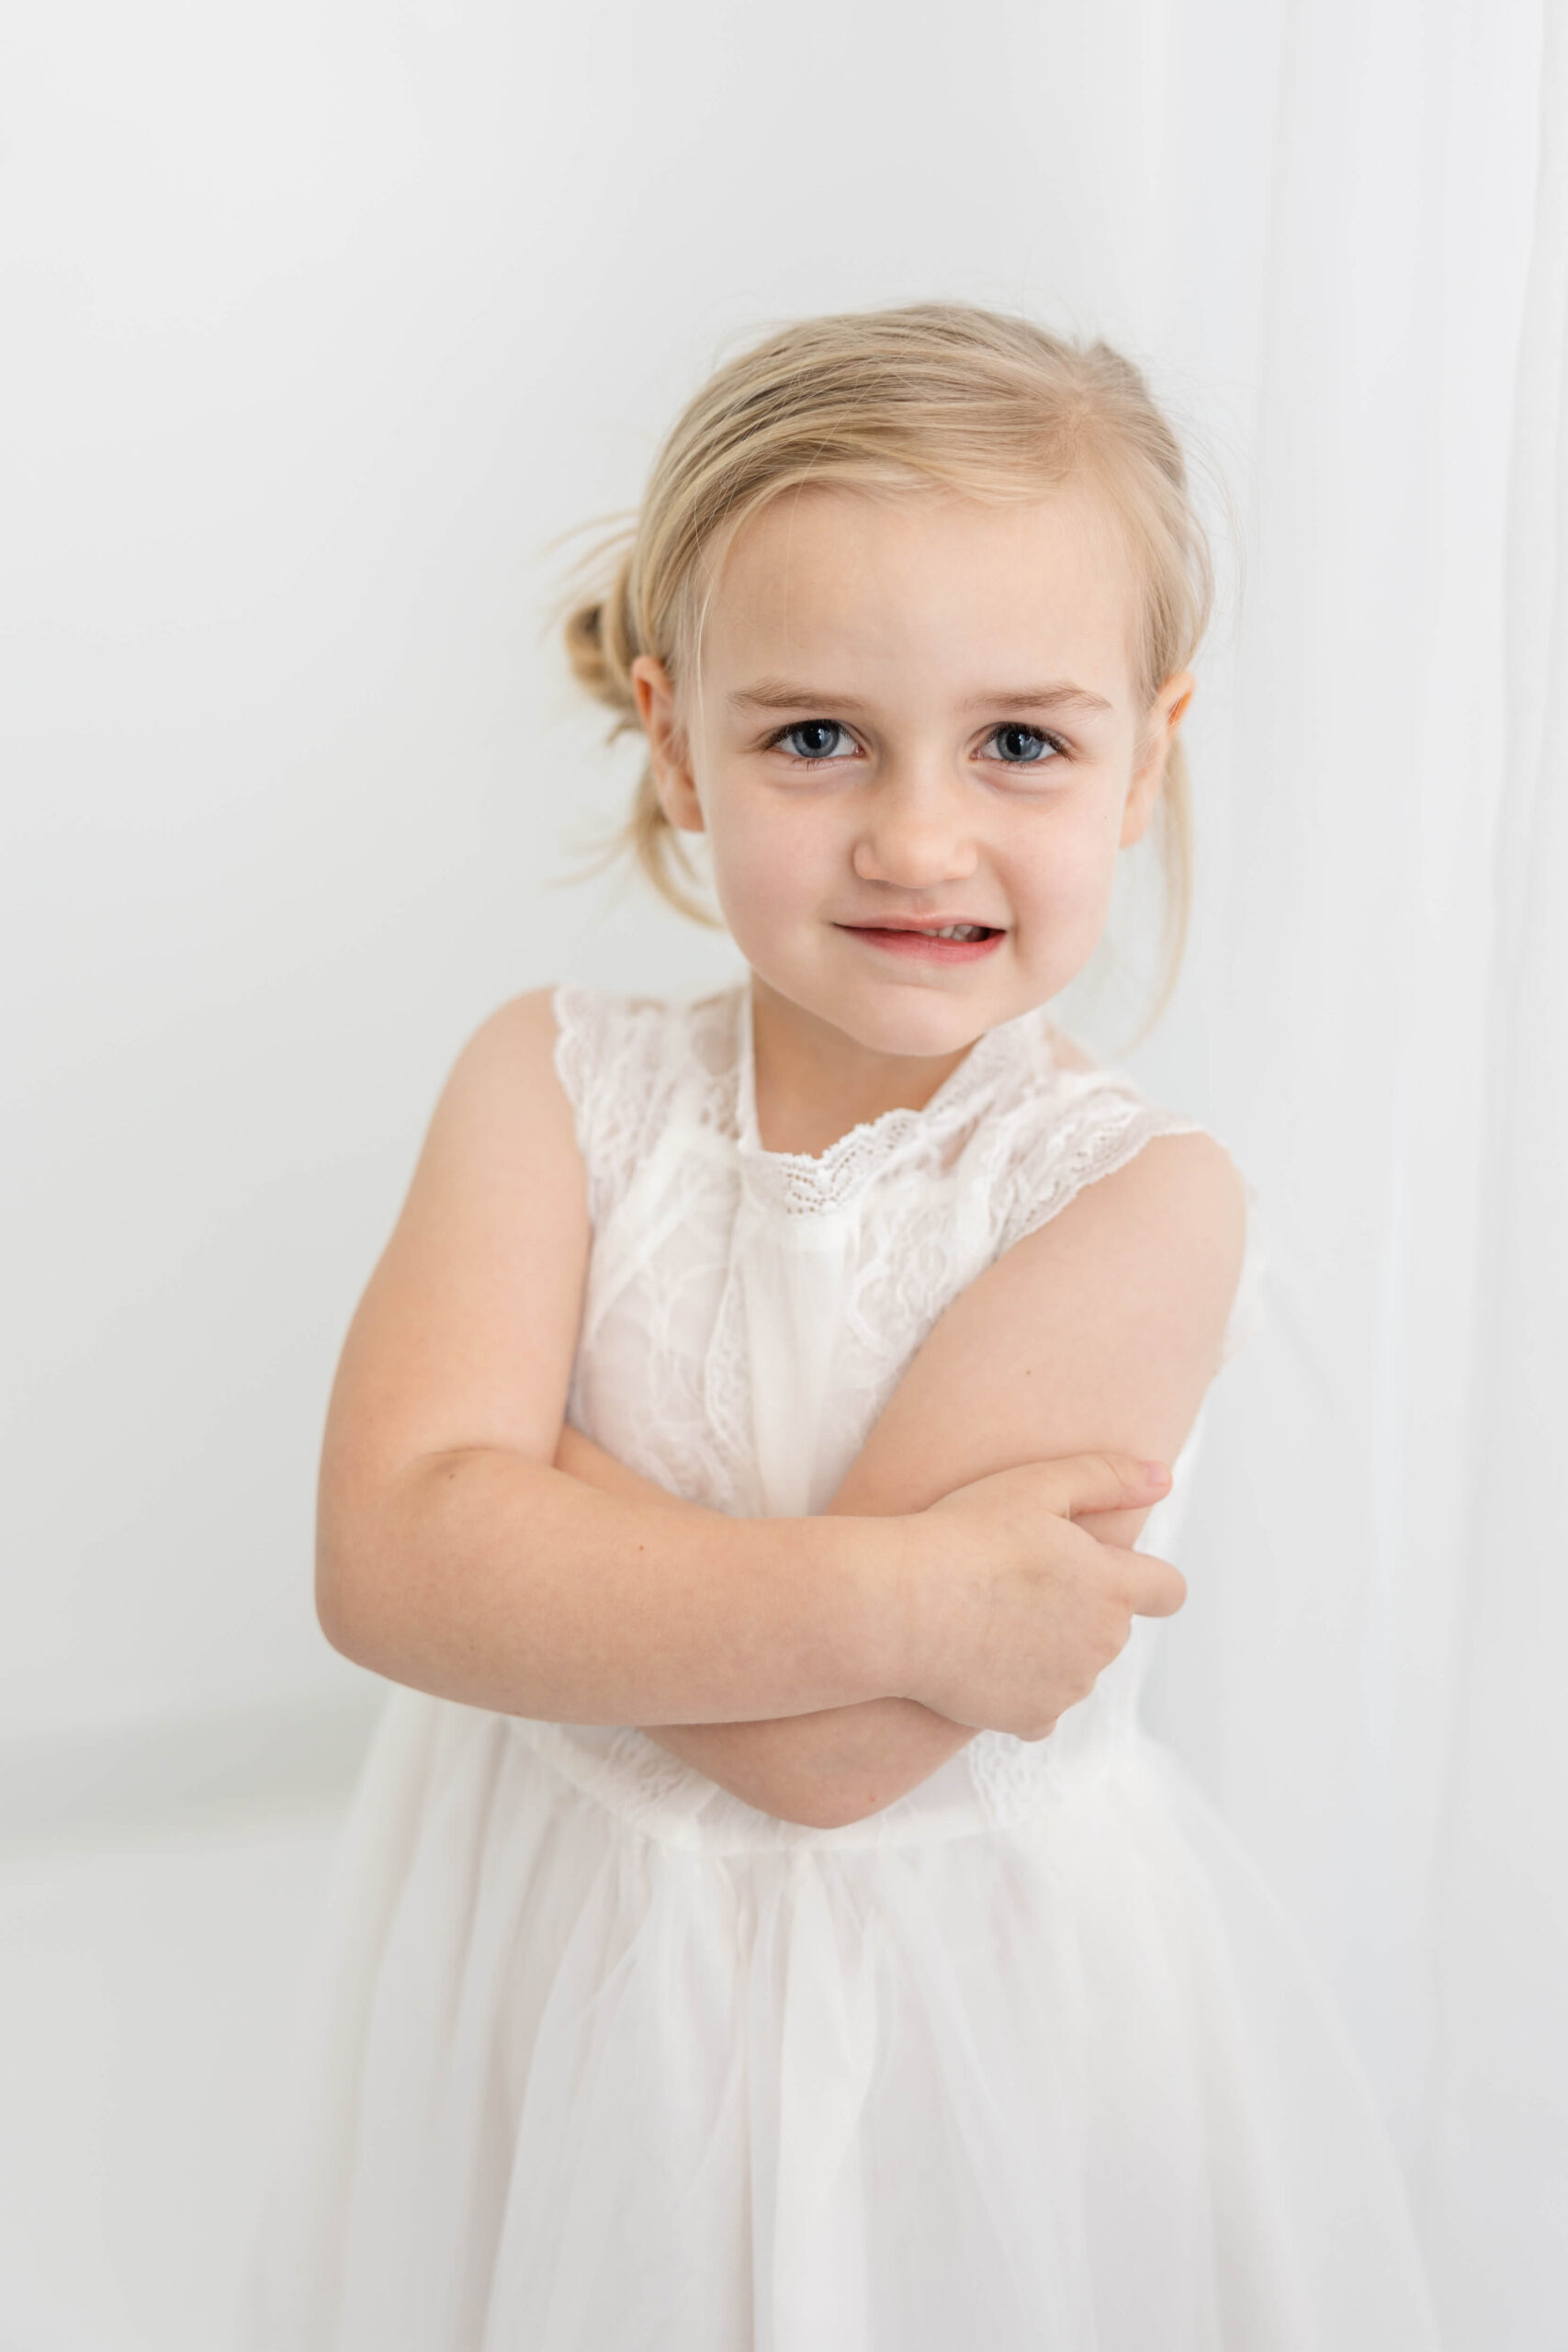 Captured a close up image of this sassy 4 year old during child portrait session 